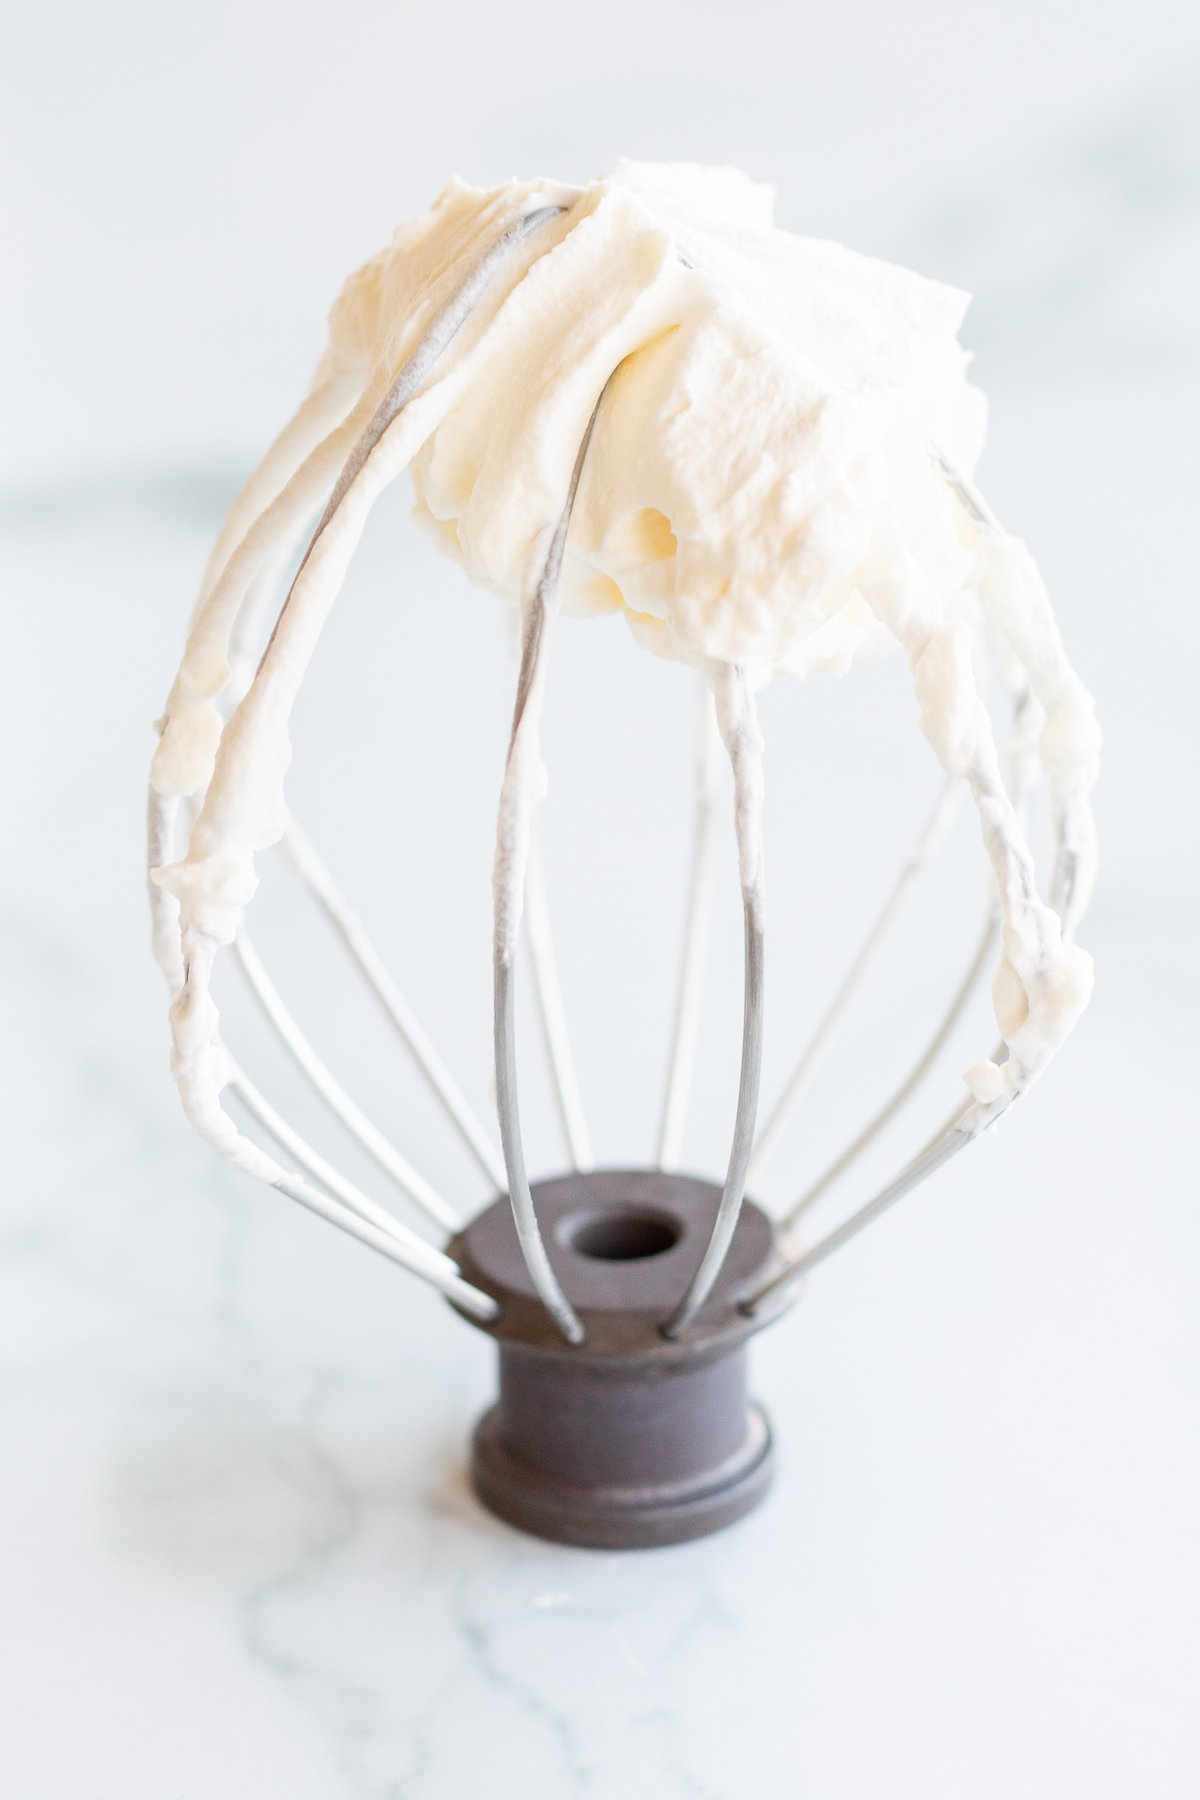 A whisk from a stand mixer that has homemade whipped cream on it.